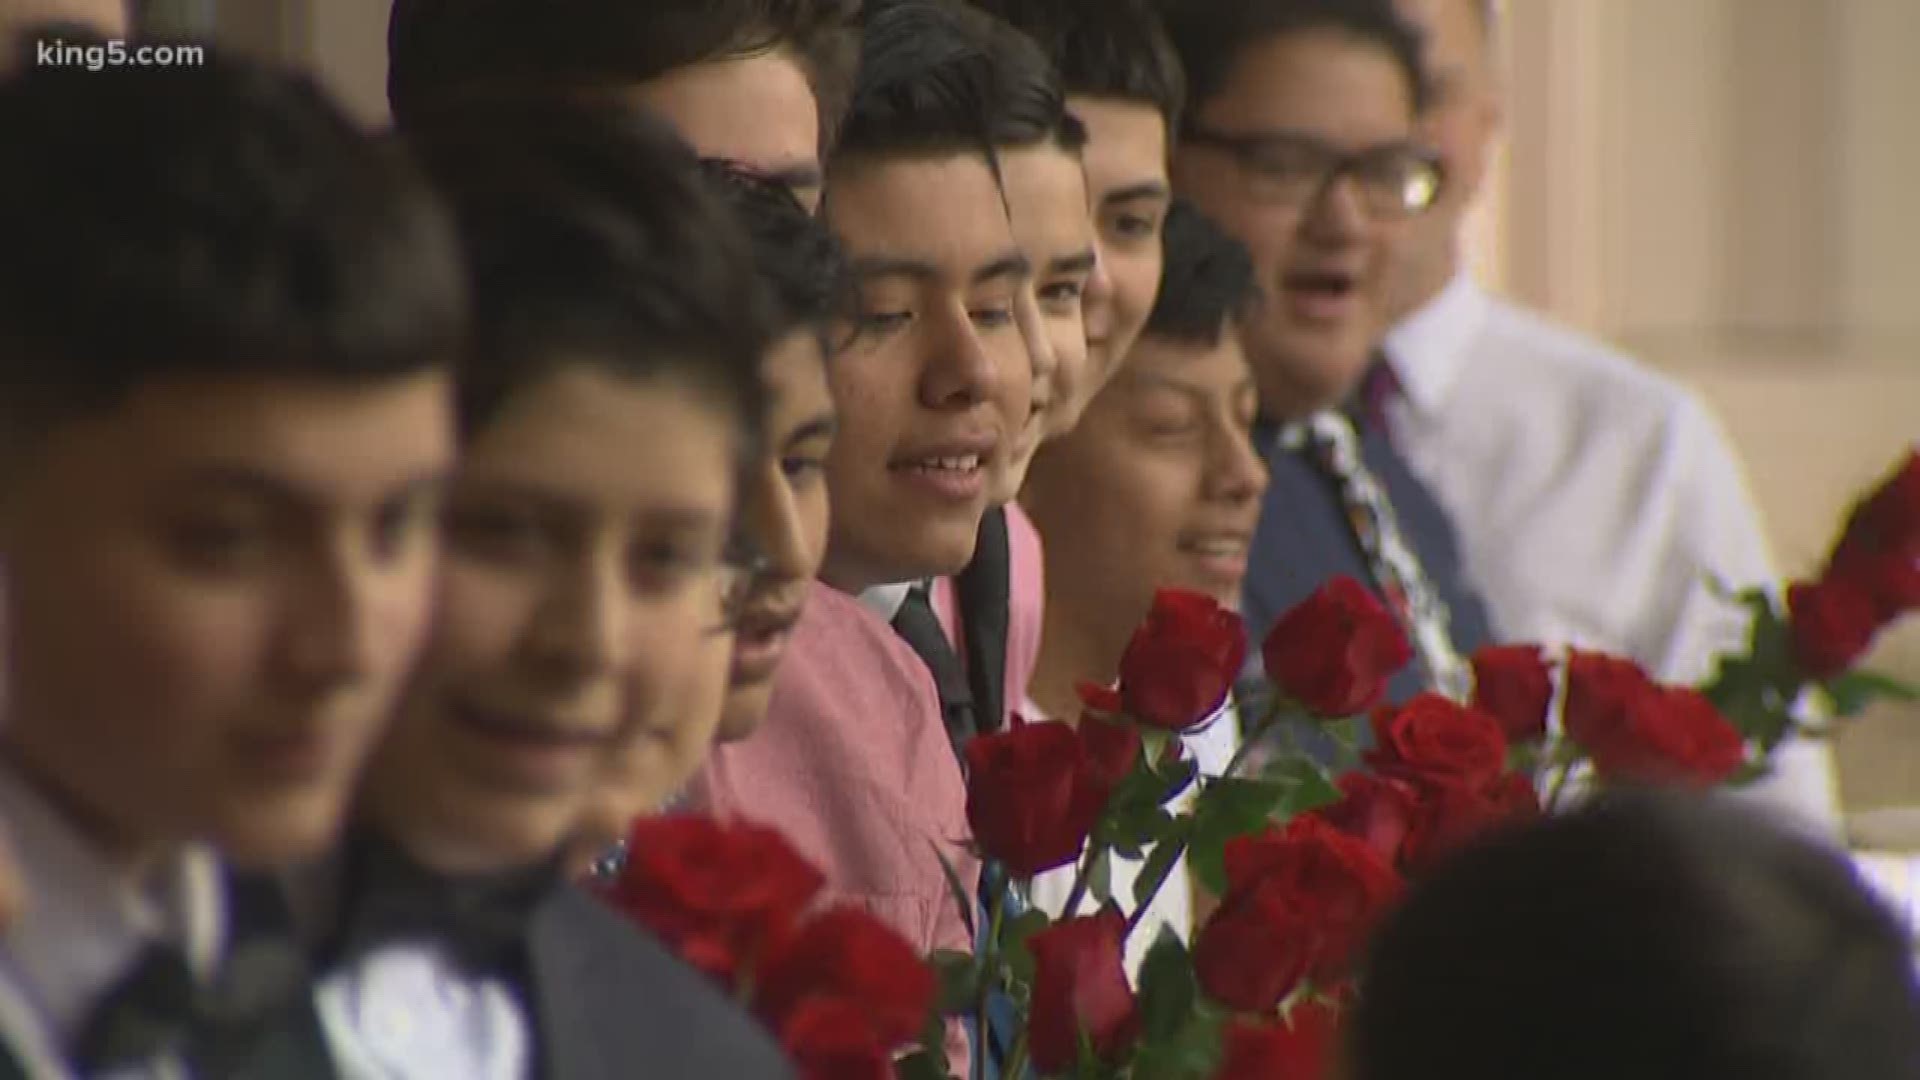 Valentine's day was a chance for a group of local students to show compassion. The group of all boys handed out valentines to everyone today, making sure no one was left out. KING 5 photojournalist Emily Landeen went to Chinook Middle School for the story.